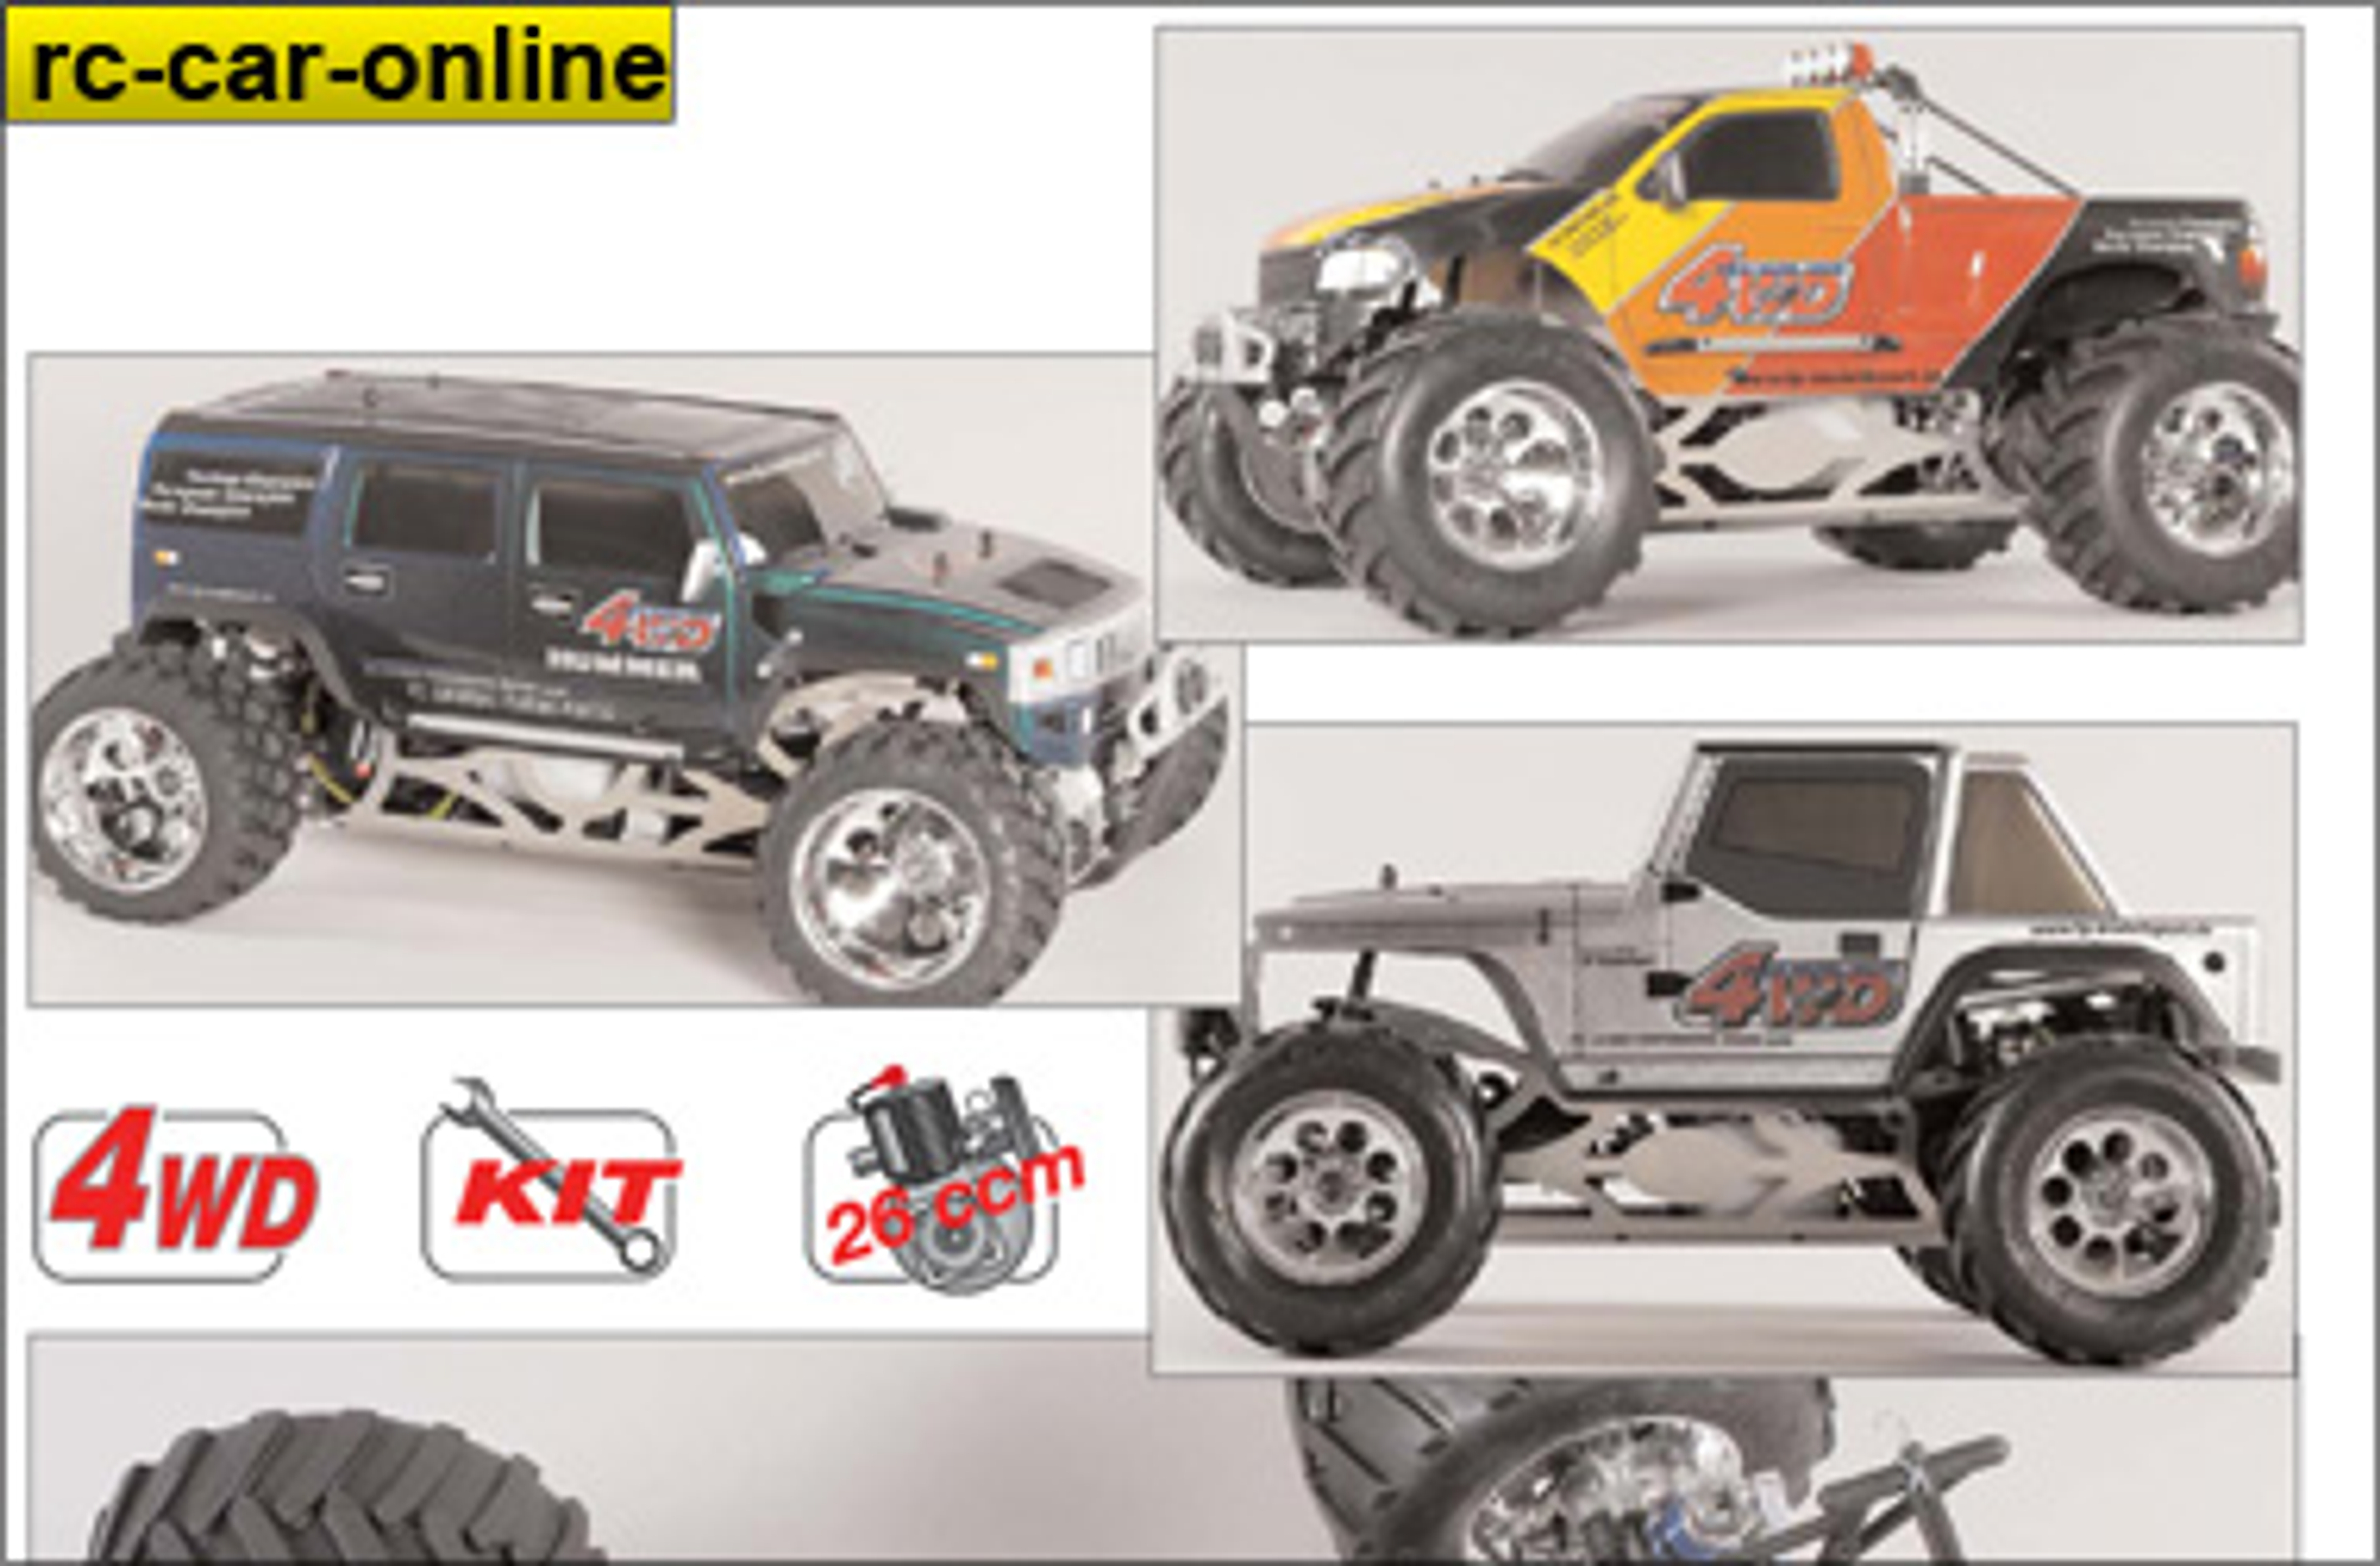 y0961/02 FG manuals for Monster/Stadium Competition 4WD, 1 St.